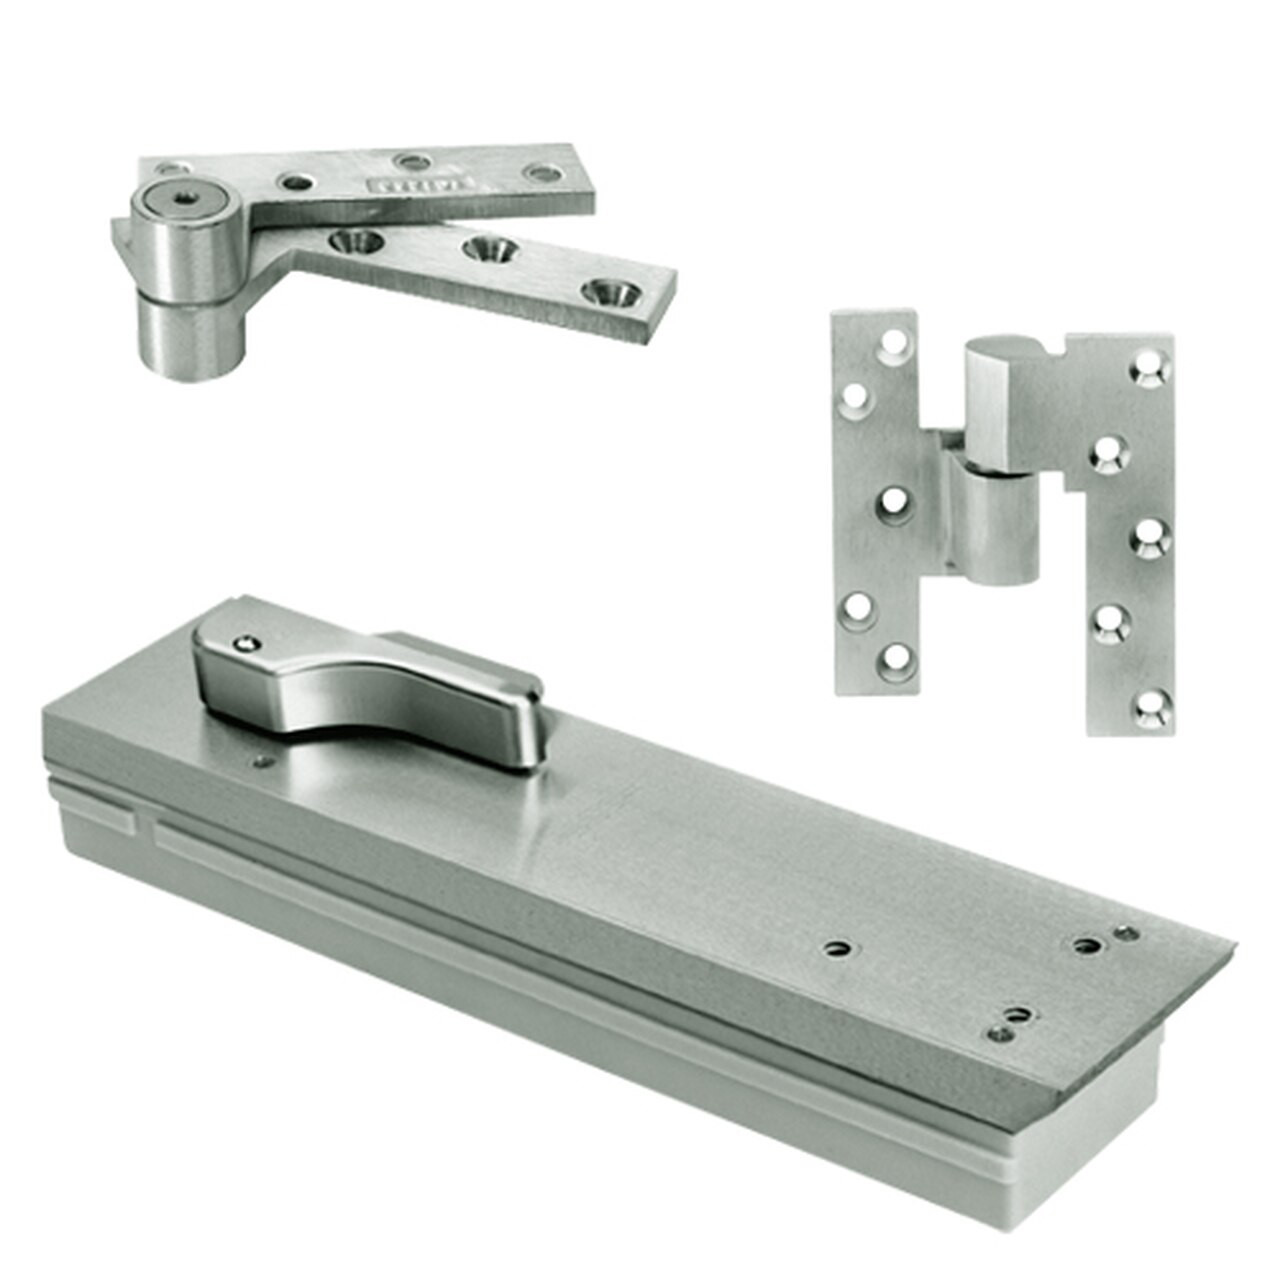 FQ5103NBC-SC-RH-619 Rixson Q51 Series Fire Rated 3/4" Offset Hung Shallow Depth Floor Closers in Satin Nickel Finish